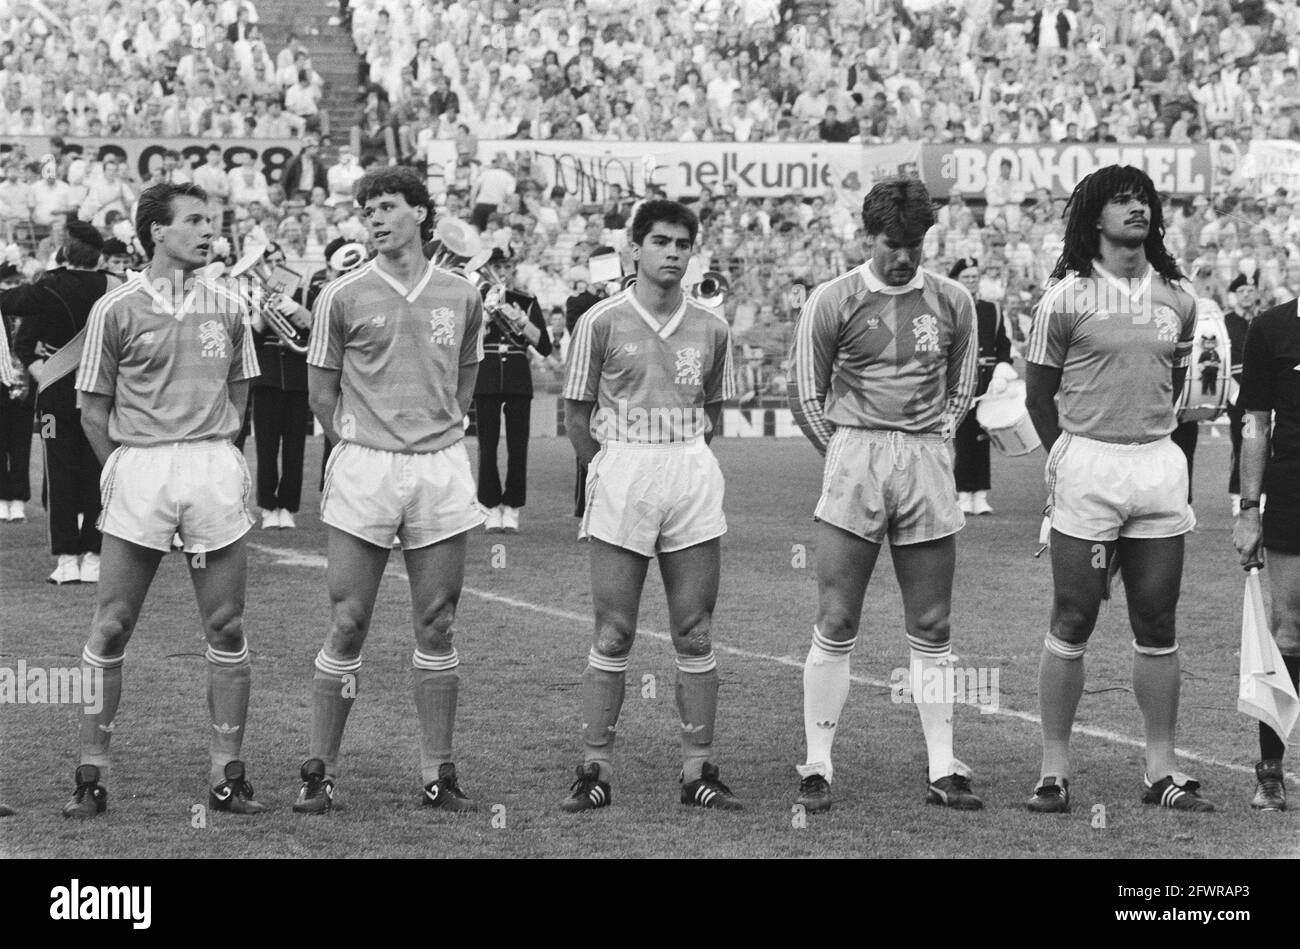 Netherlands against Hungary 2-0; part Dutch national team from left to right Van t Schip, Van Basten, Silooy, Hiele, Gullit, April 29, 1987, Elftallen, sport, soccer, The Netherlands, 20th century press agency photo, news to remember, documentary, historic photography 1945-1990, visual stories, human history of the Twentieth Century, capturing moments in time Stock Photo